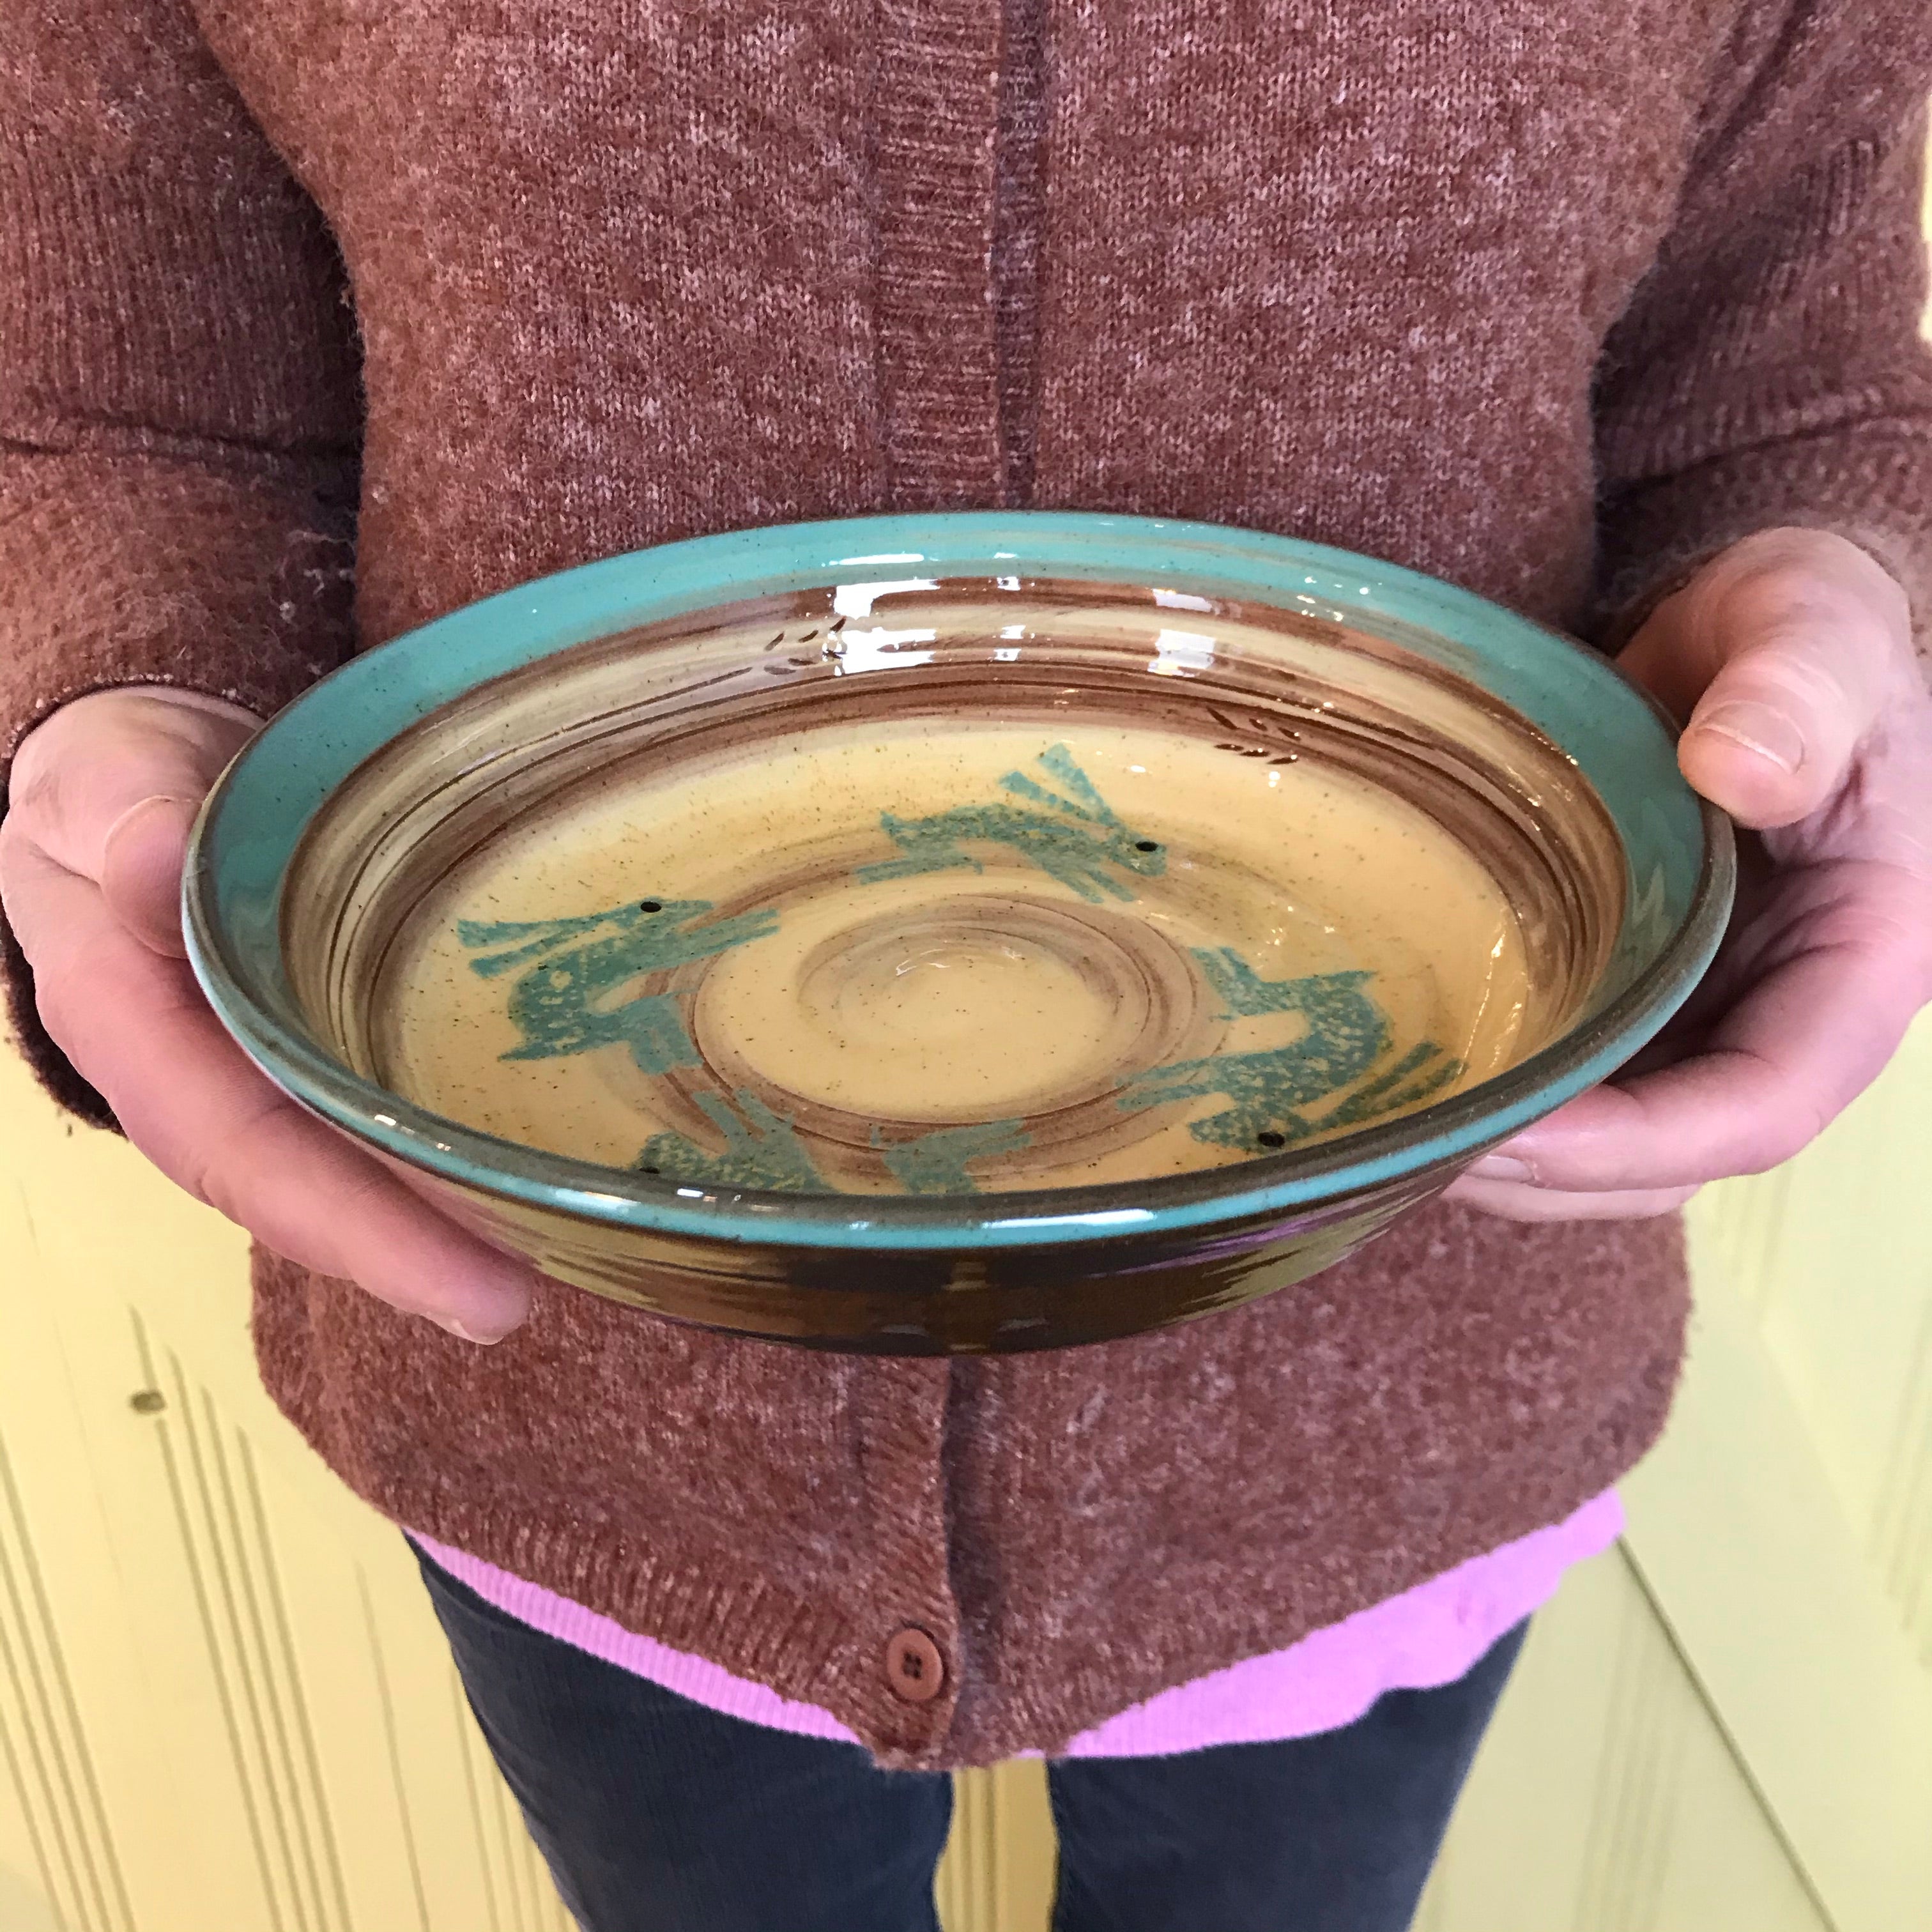 Cream and Turquoise Bowl with Hares